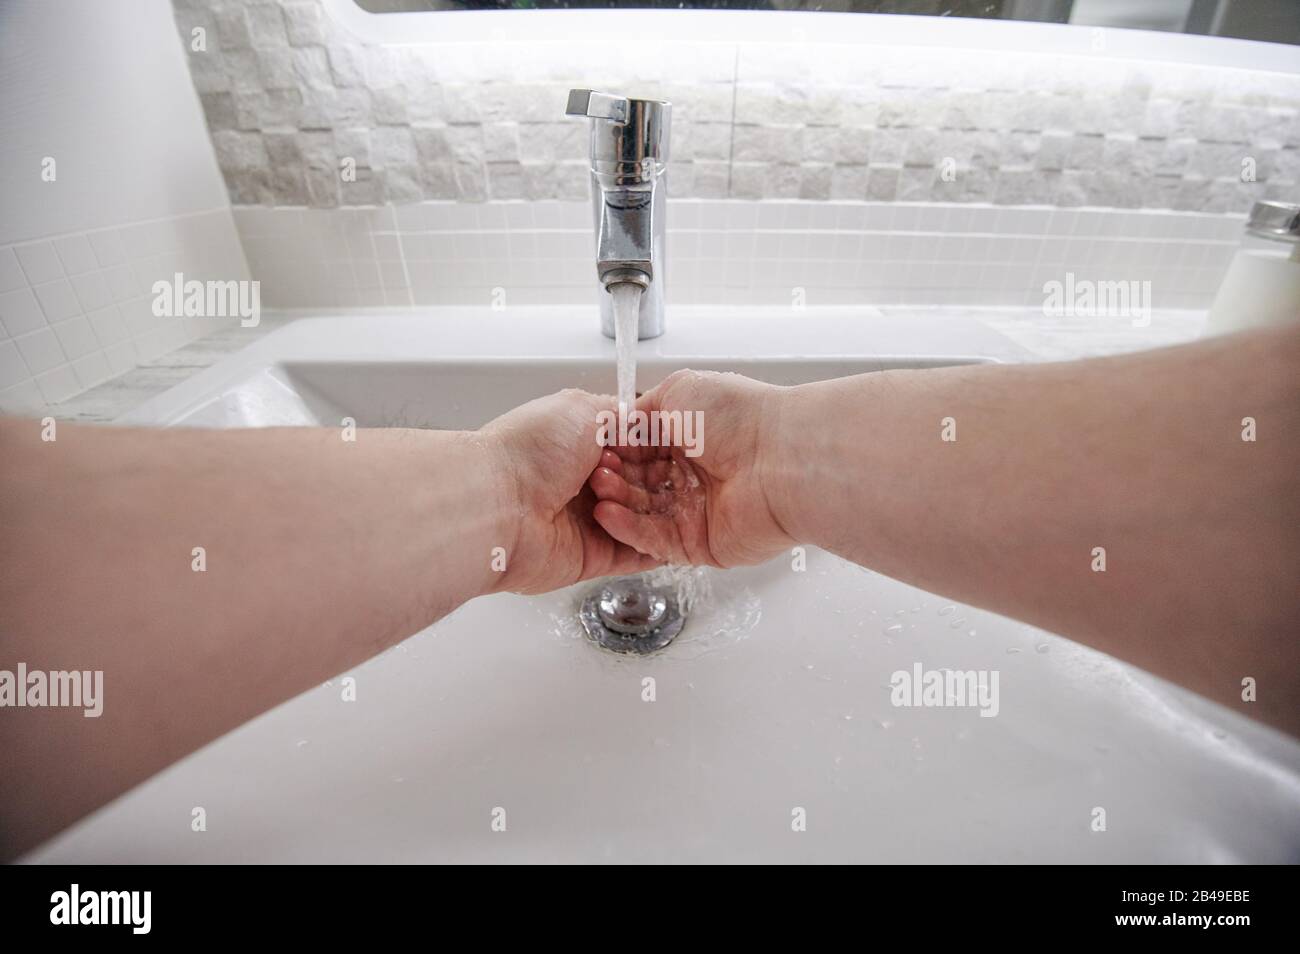 Cleaning hands before eating in bathroom close up view Stock Photo